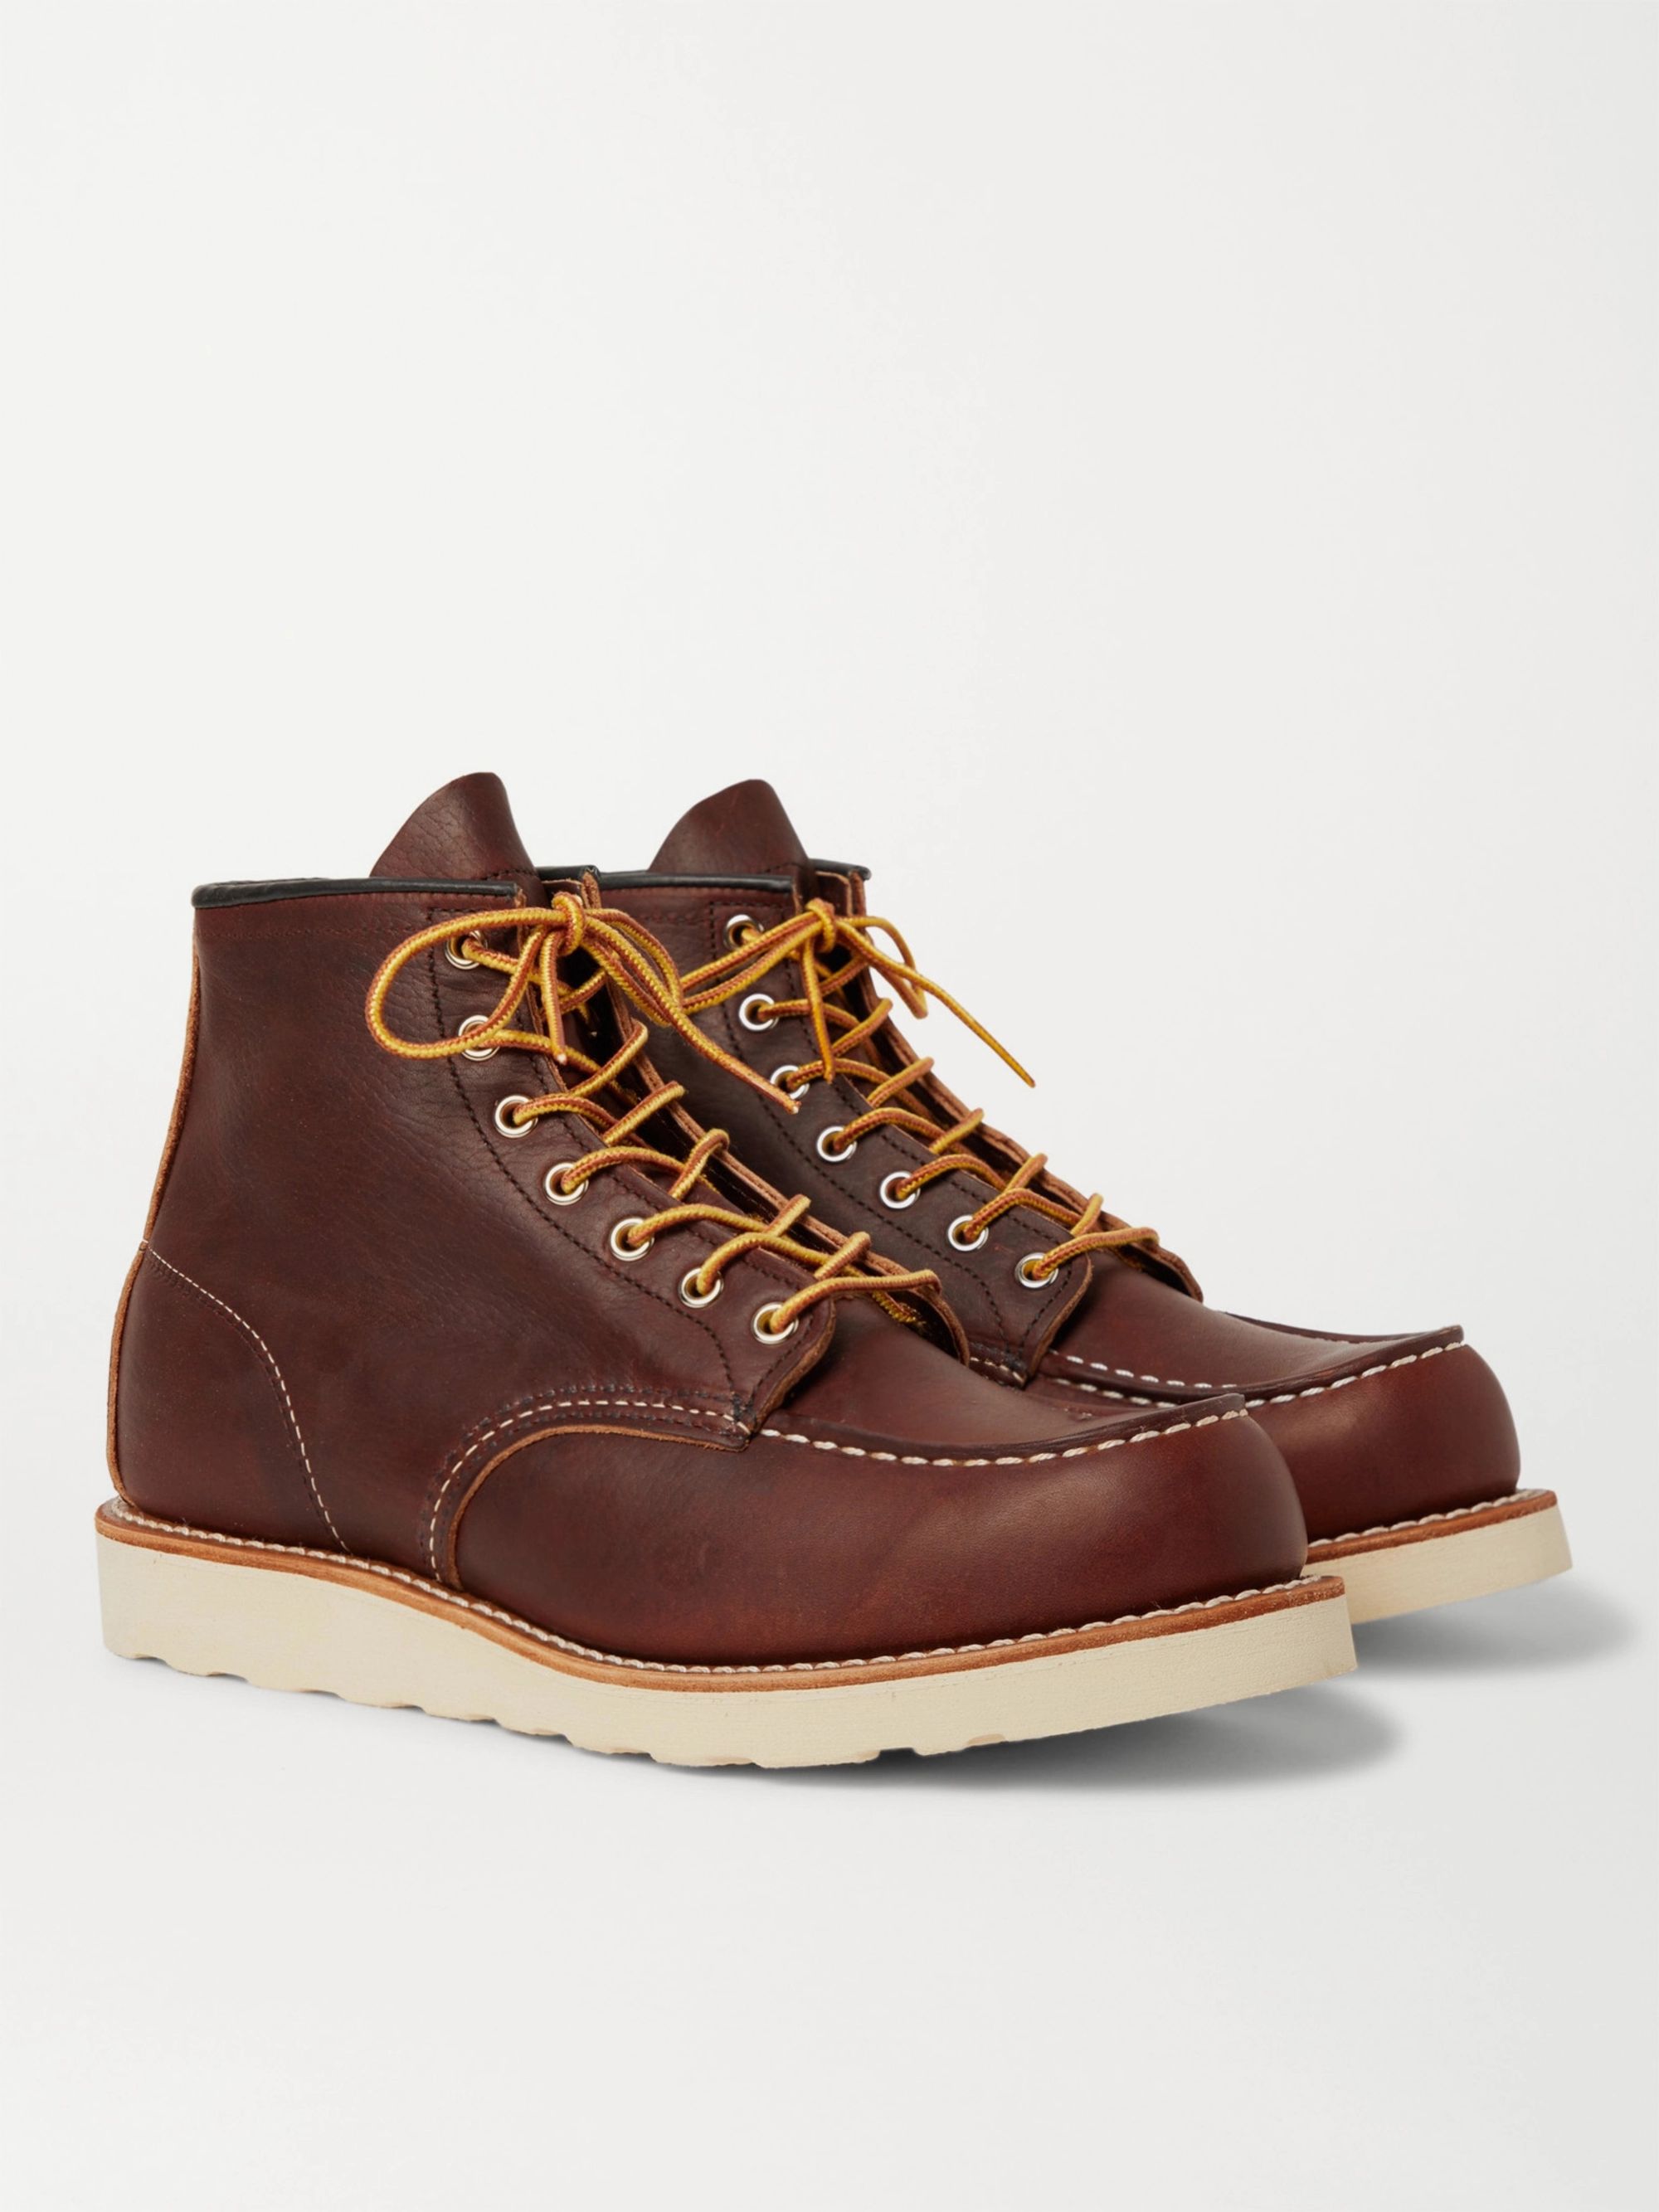 who sells red wing boots